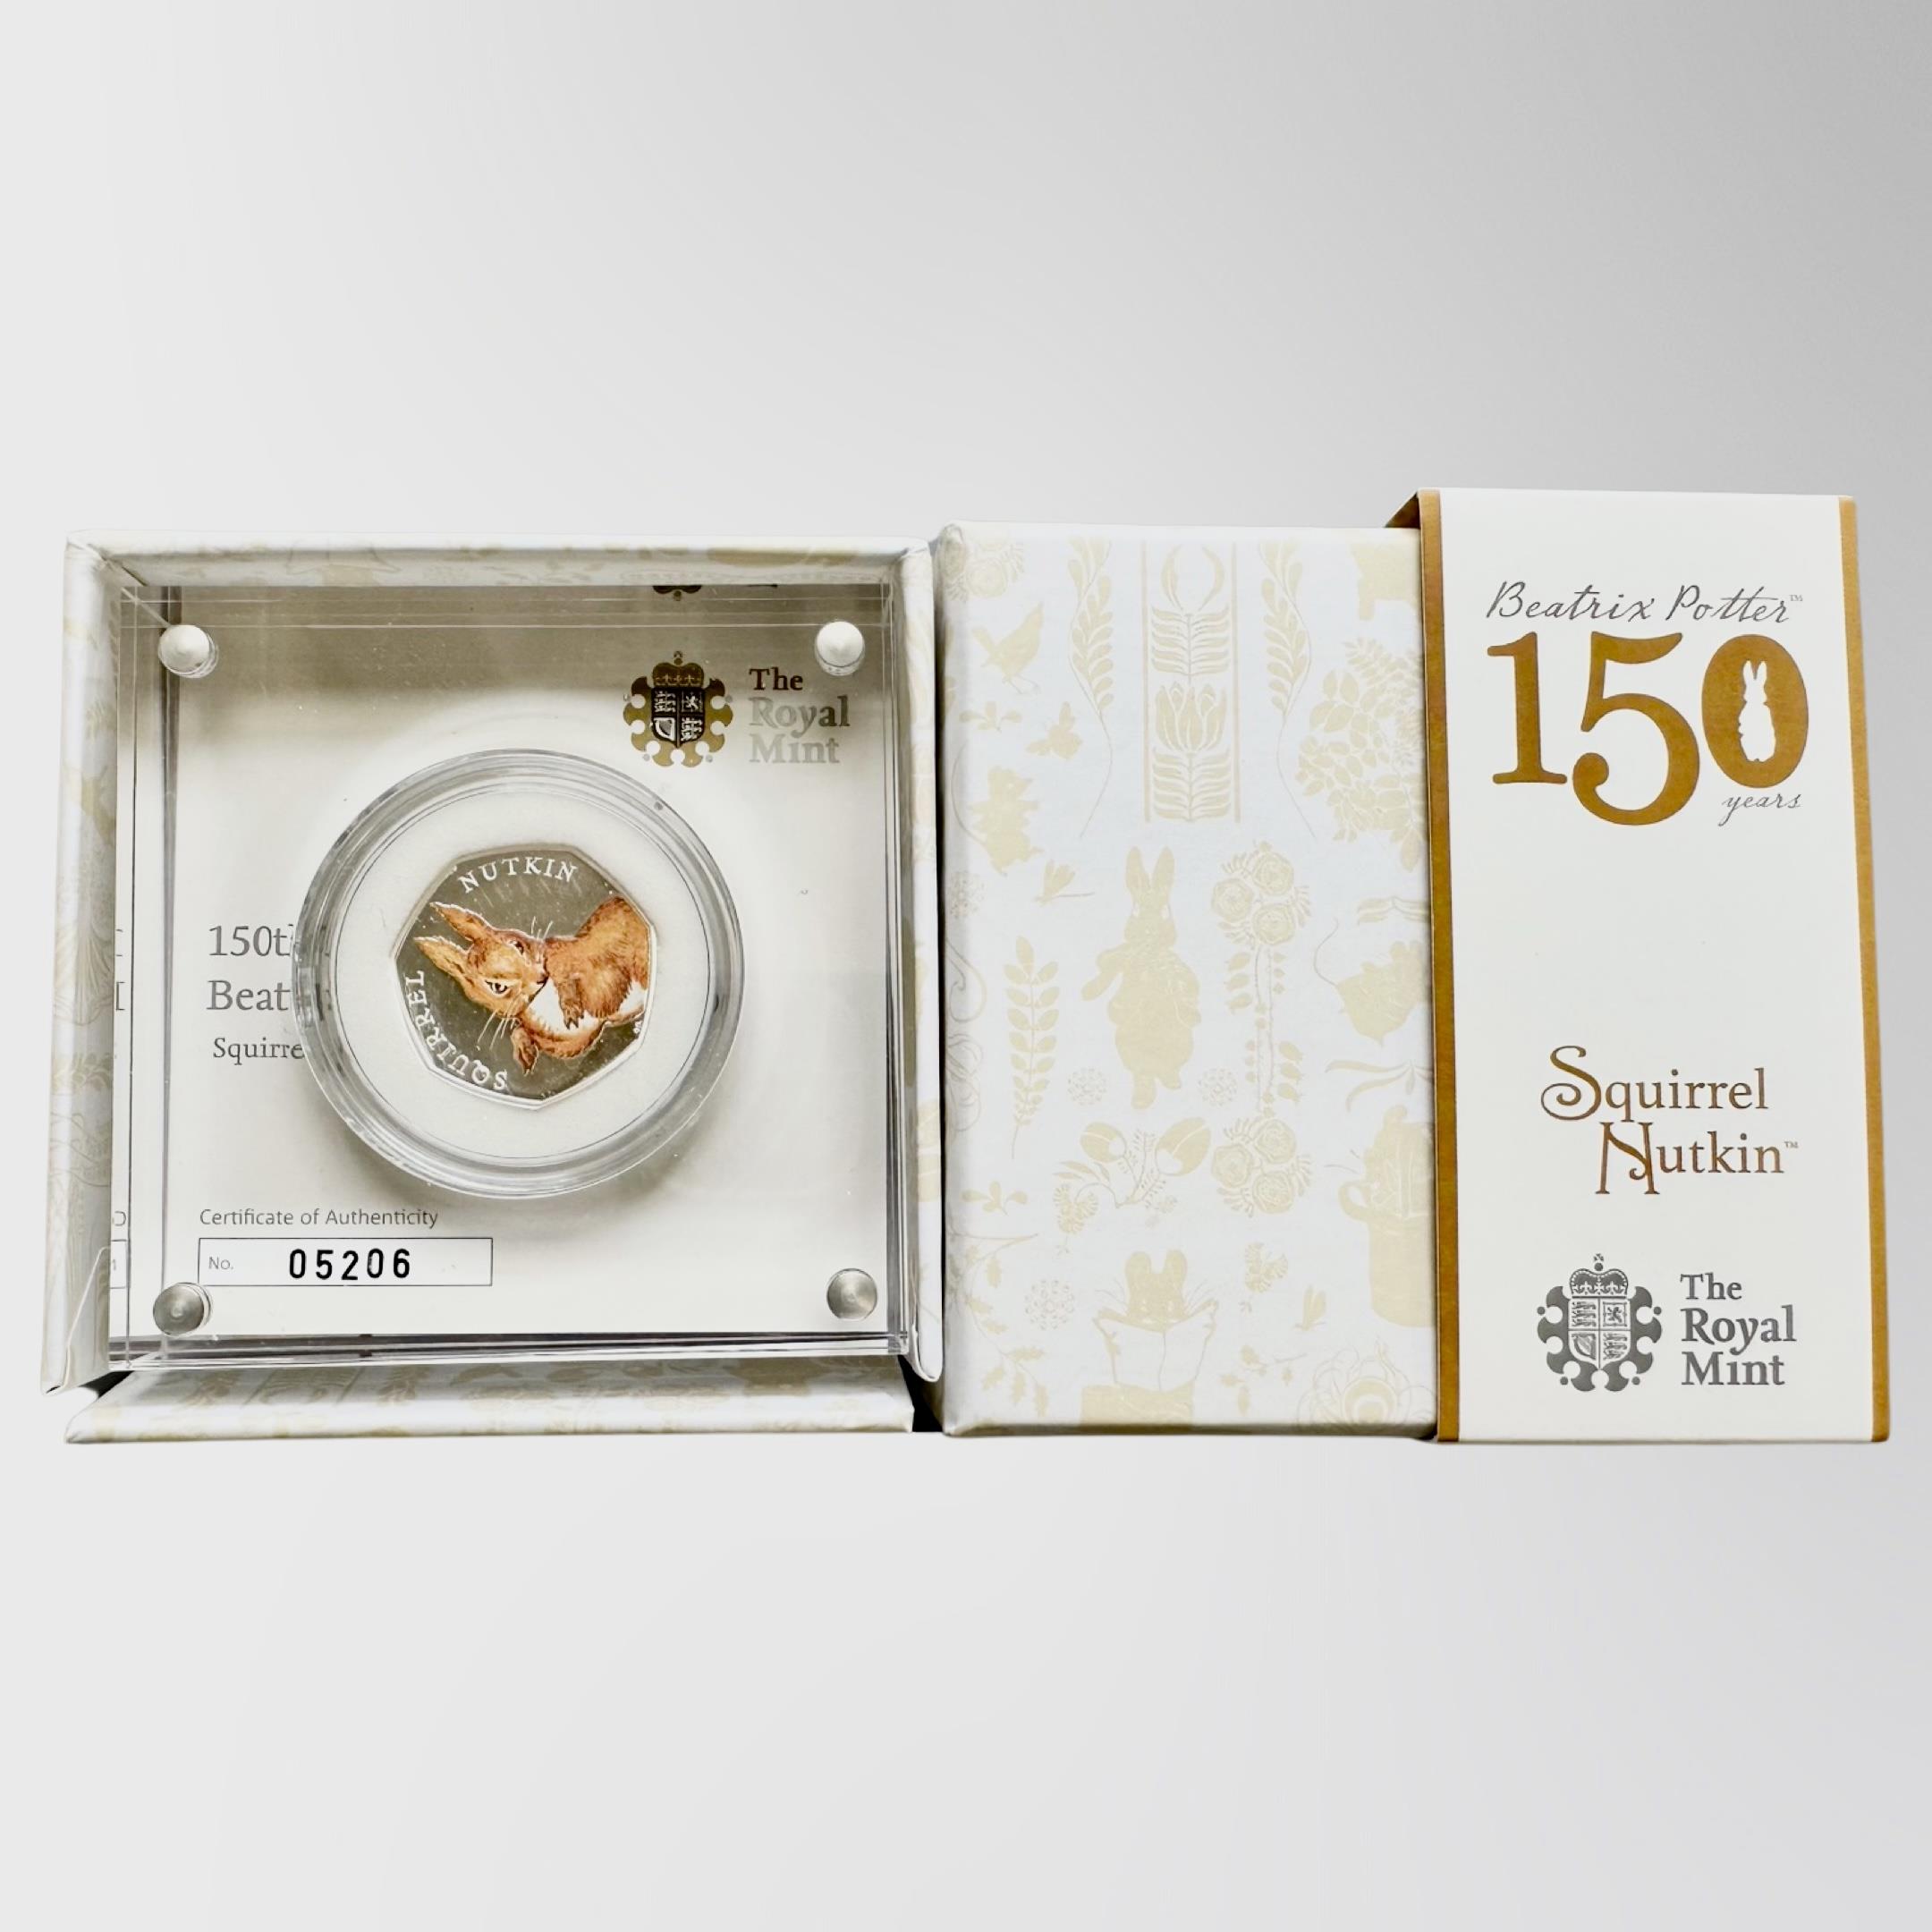 The Royal Mint : Beatrix Potter 150th Anniversary - Squirrel Nutkin, 2016 UK 50p Silver Proof Coin,